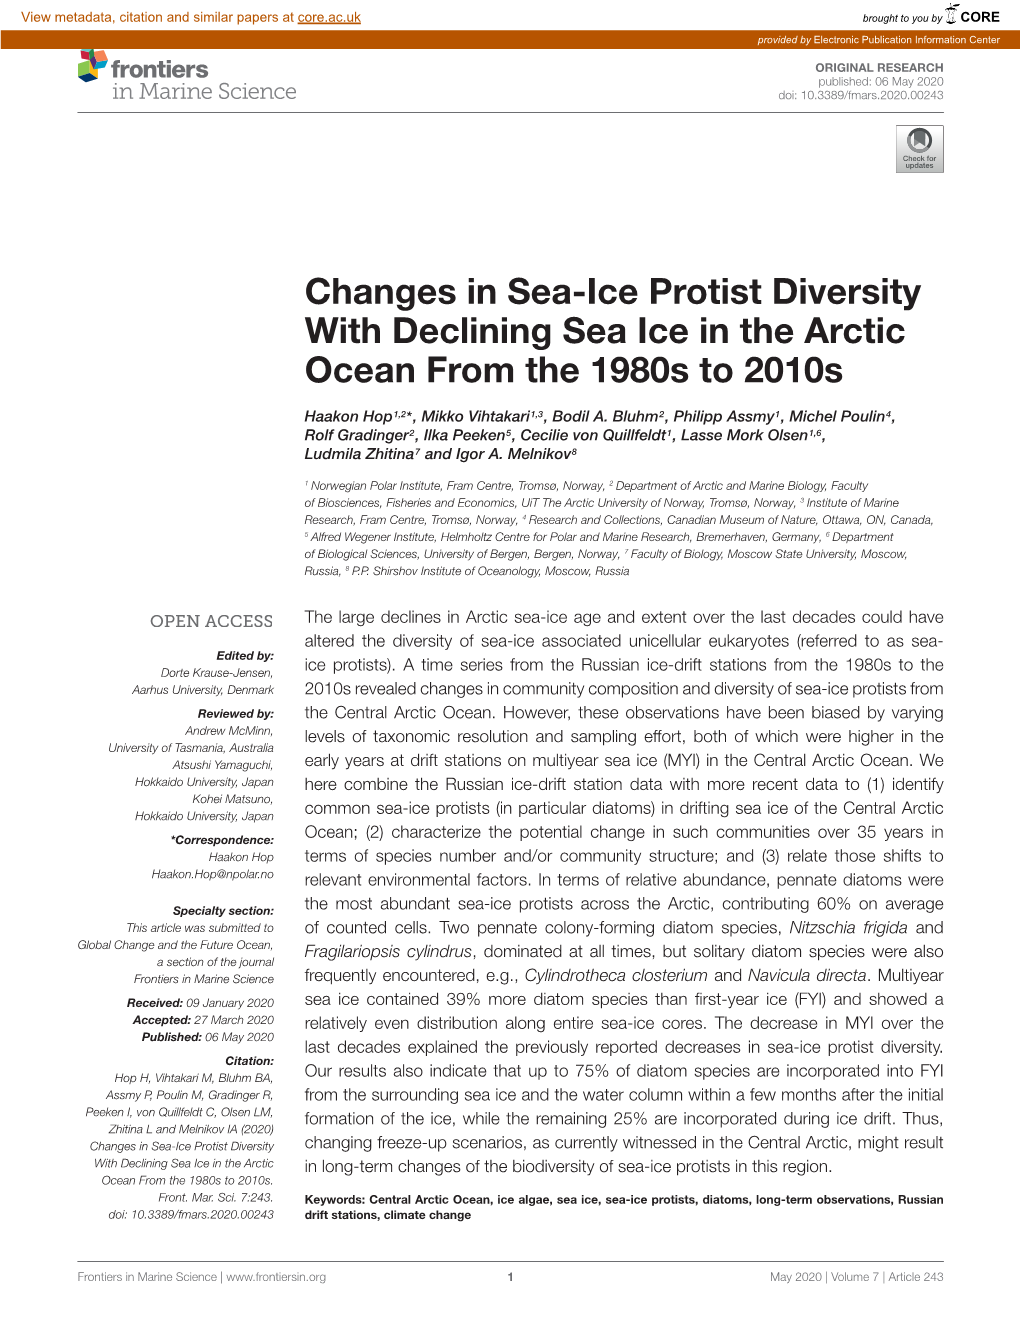 Changes in Sea-Ice Protist Diversity with Declining Sea Ice in the Arctic Ocean from the 1980S to 2010S